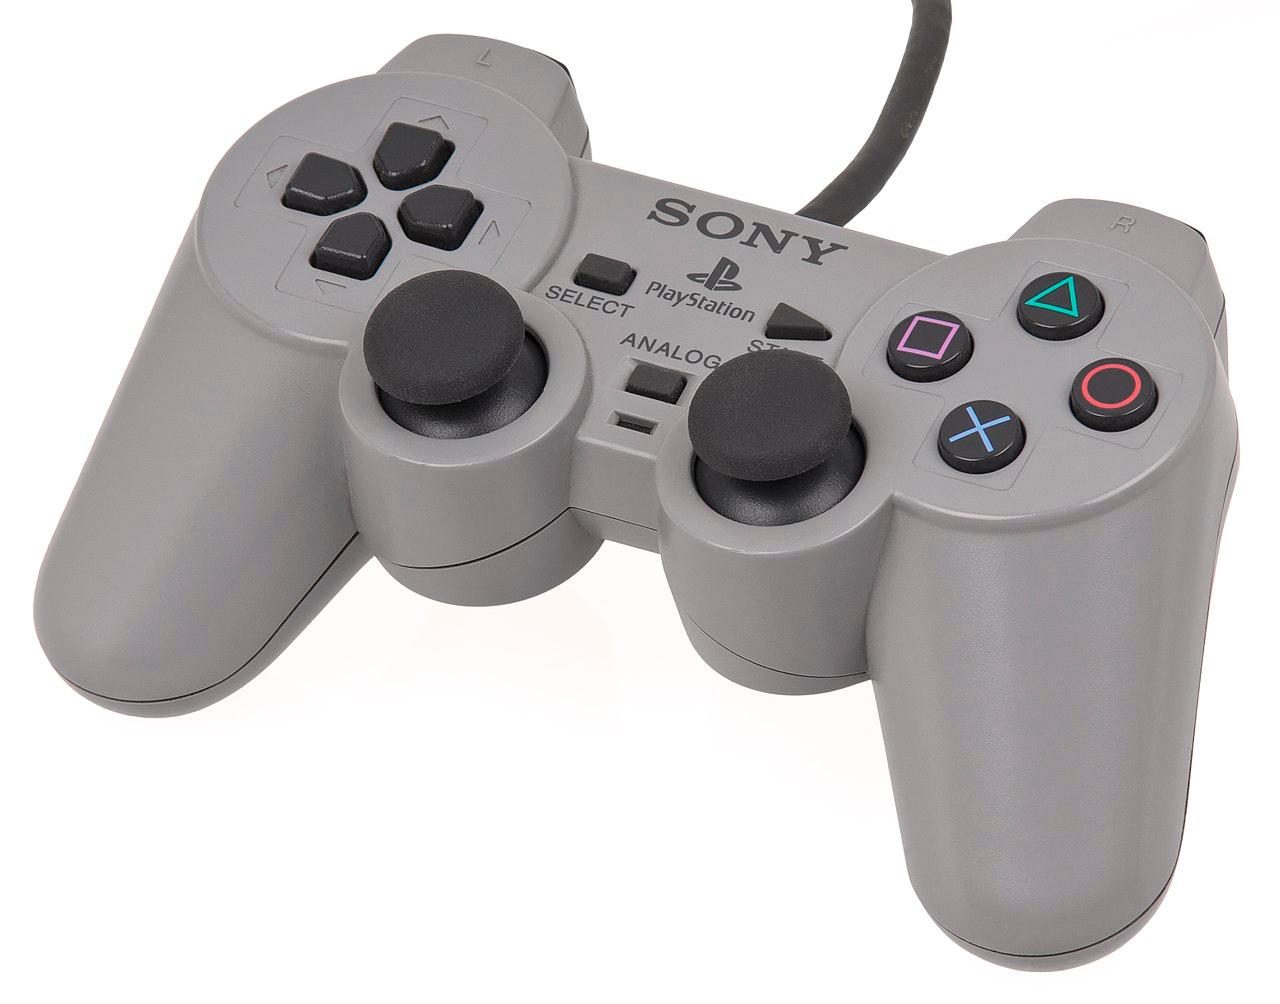 A Sony PlayStation 1 DualShock controller